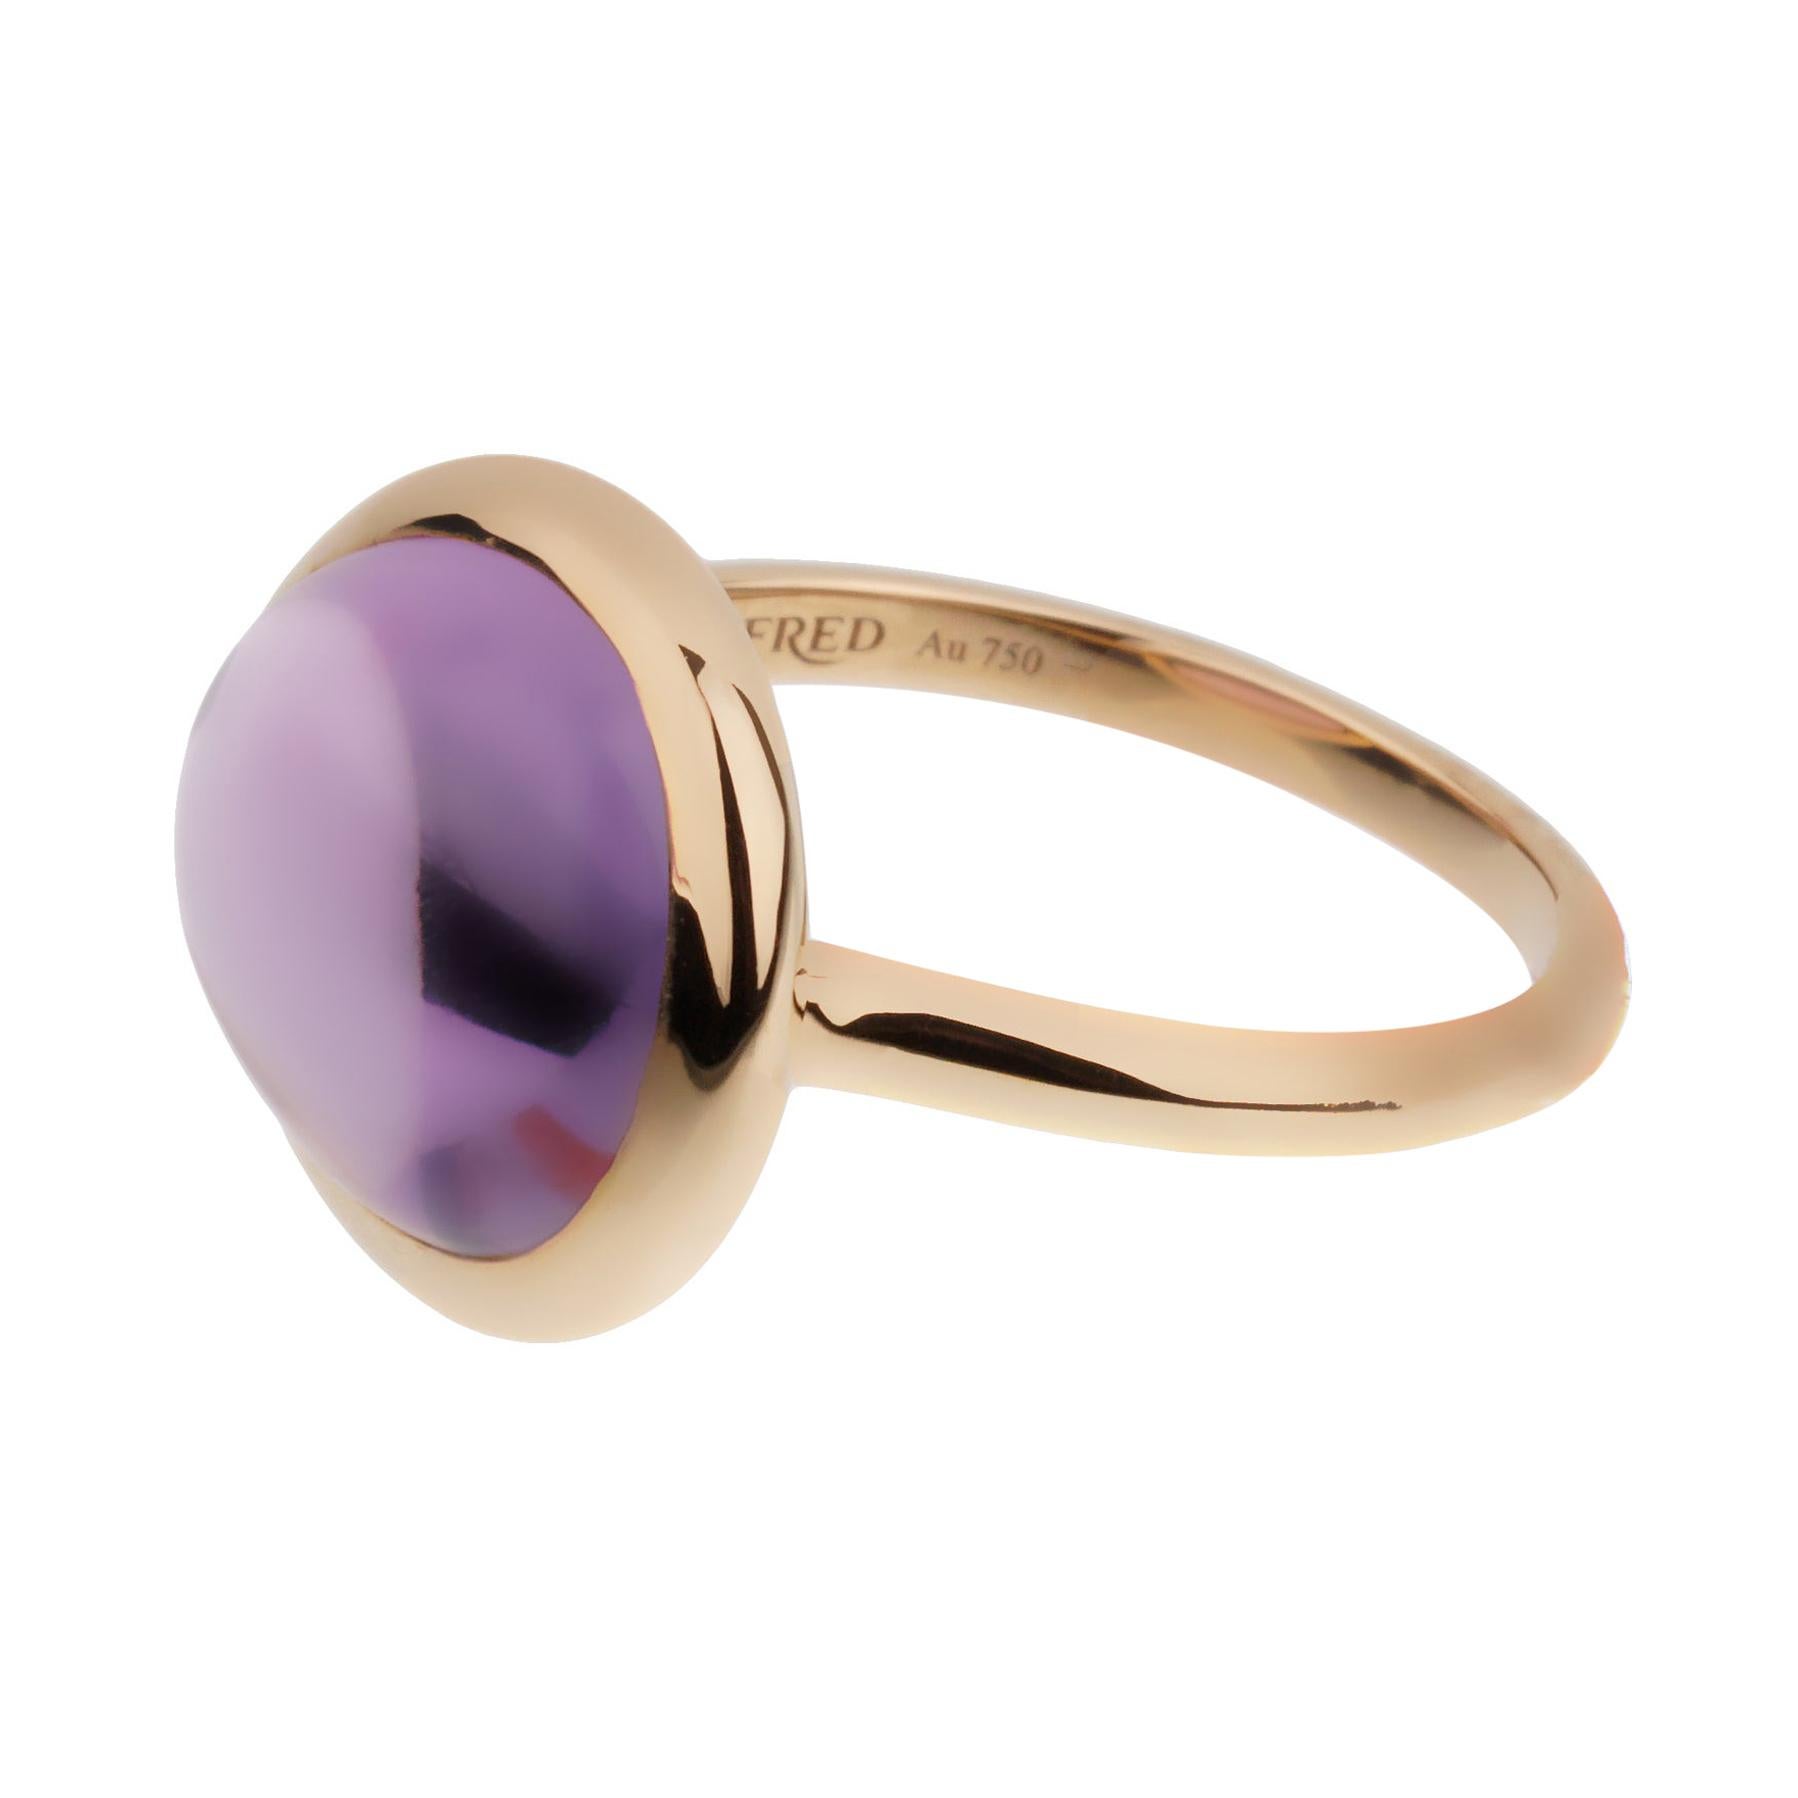 A chic Fred of Paris rose gold cocktail ring showcasing a 7ct cabochon Amethyst set in 18k gold. The ring measures a size 6 3 /4 and can be resized if needed.